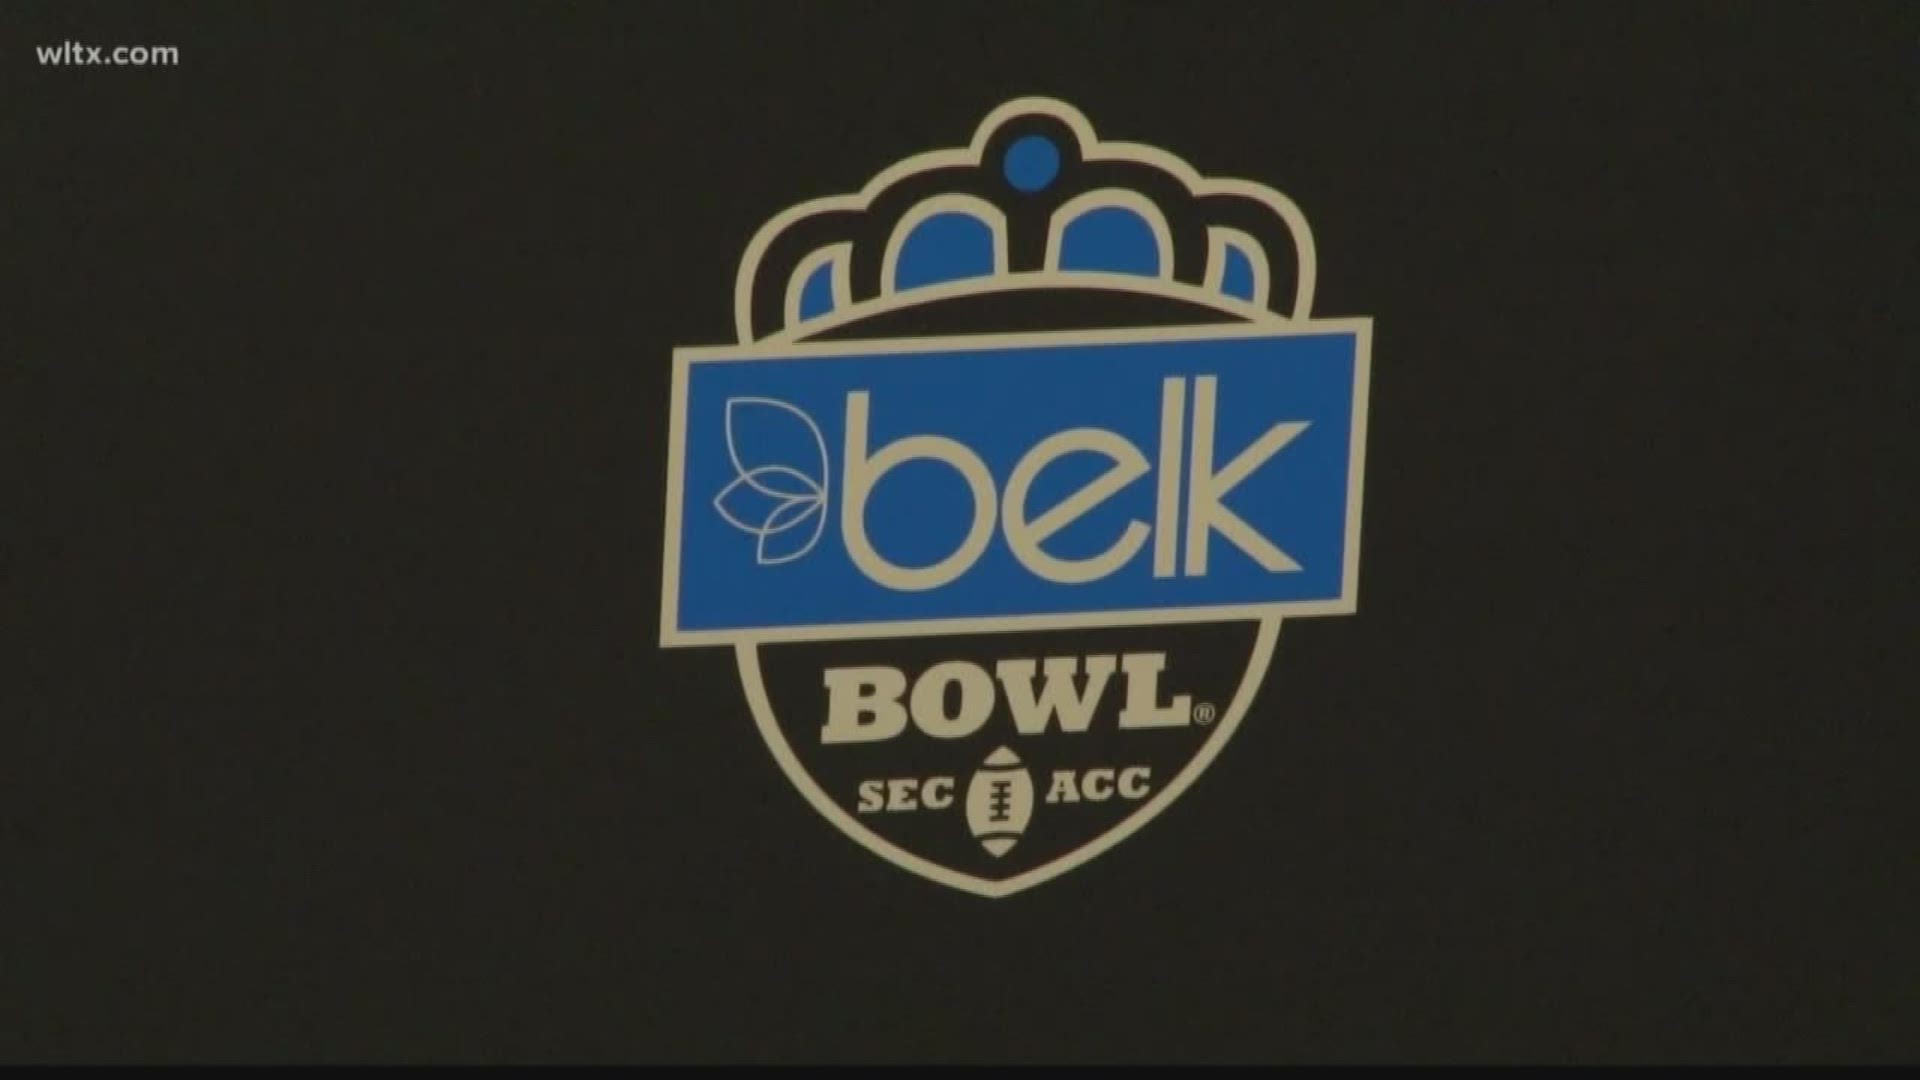 A win over Virginia in the Belk Bowl will create a positive feeling going into the offseason for the Gamecocks.